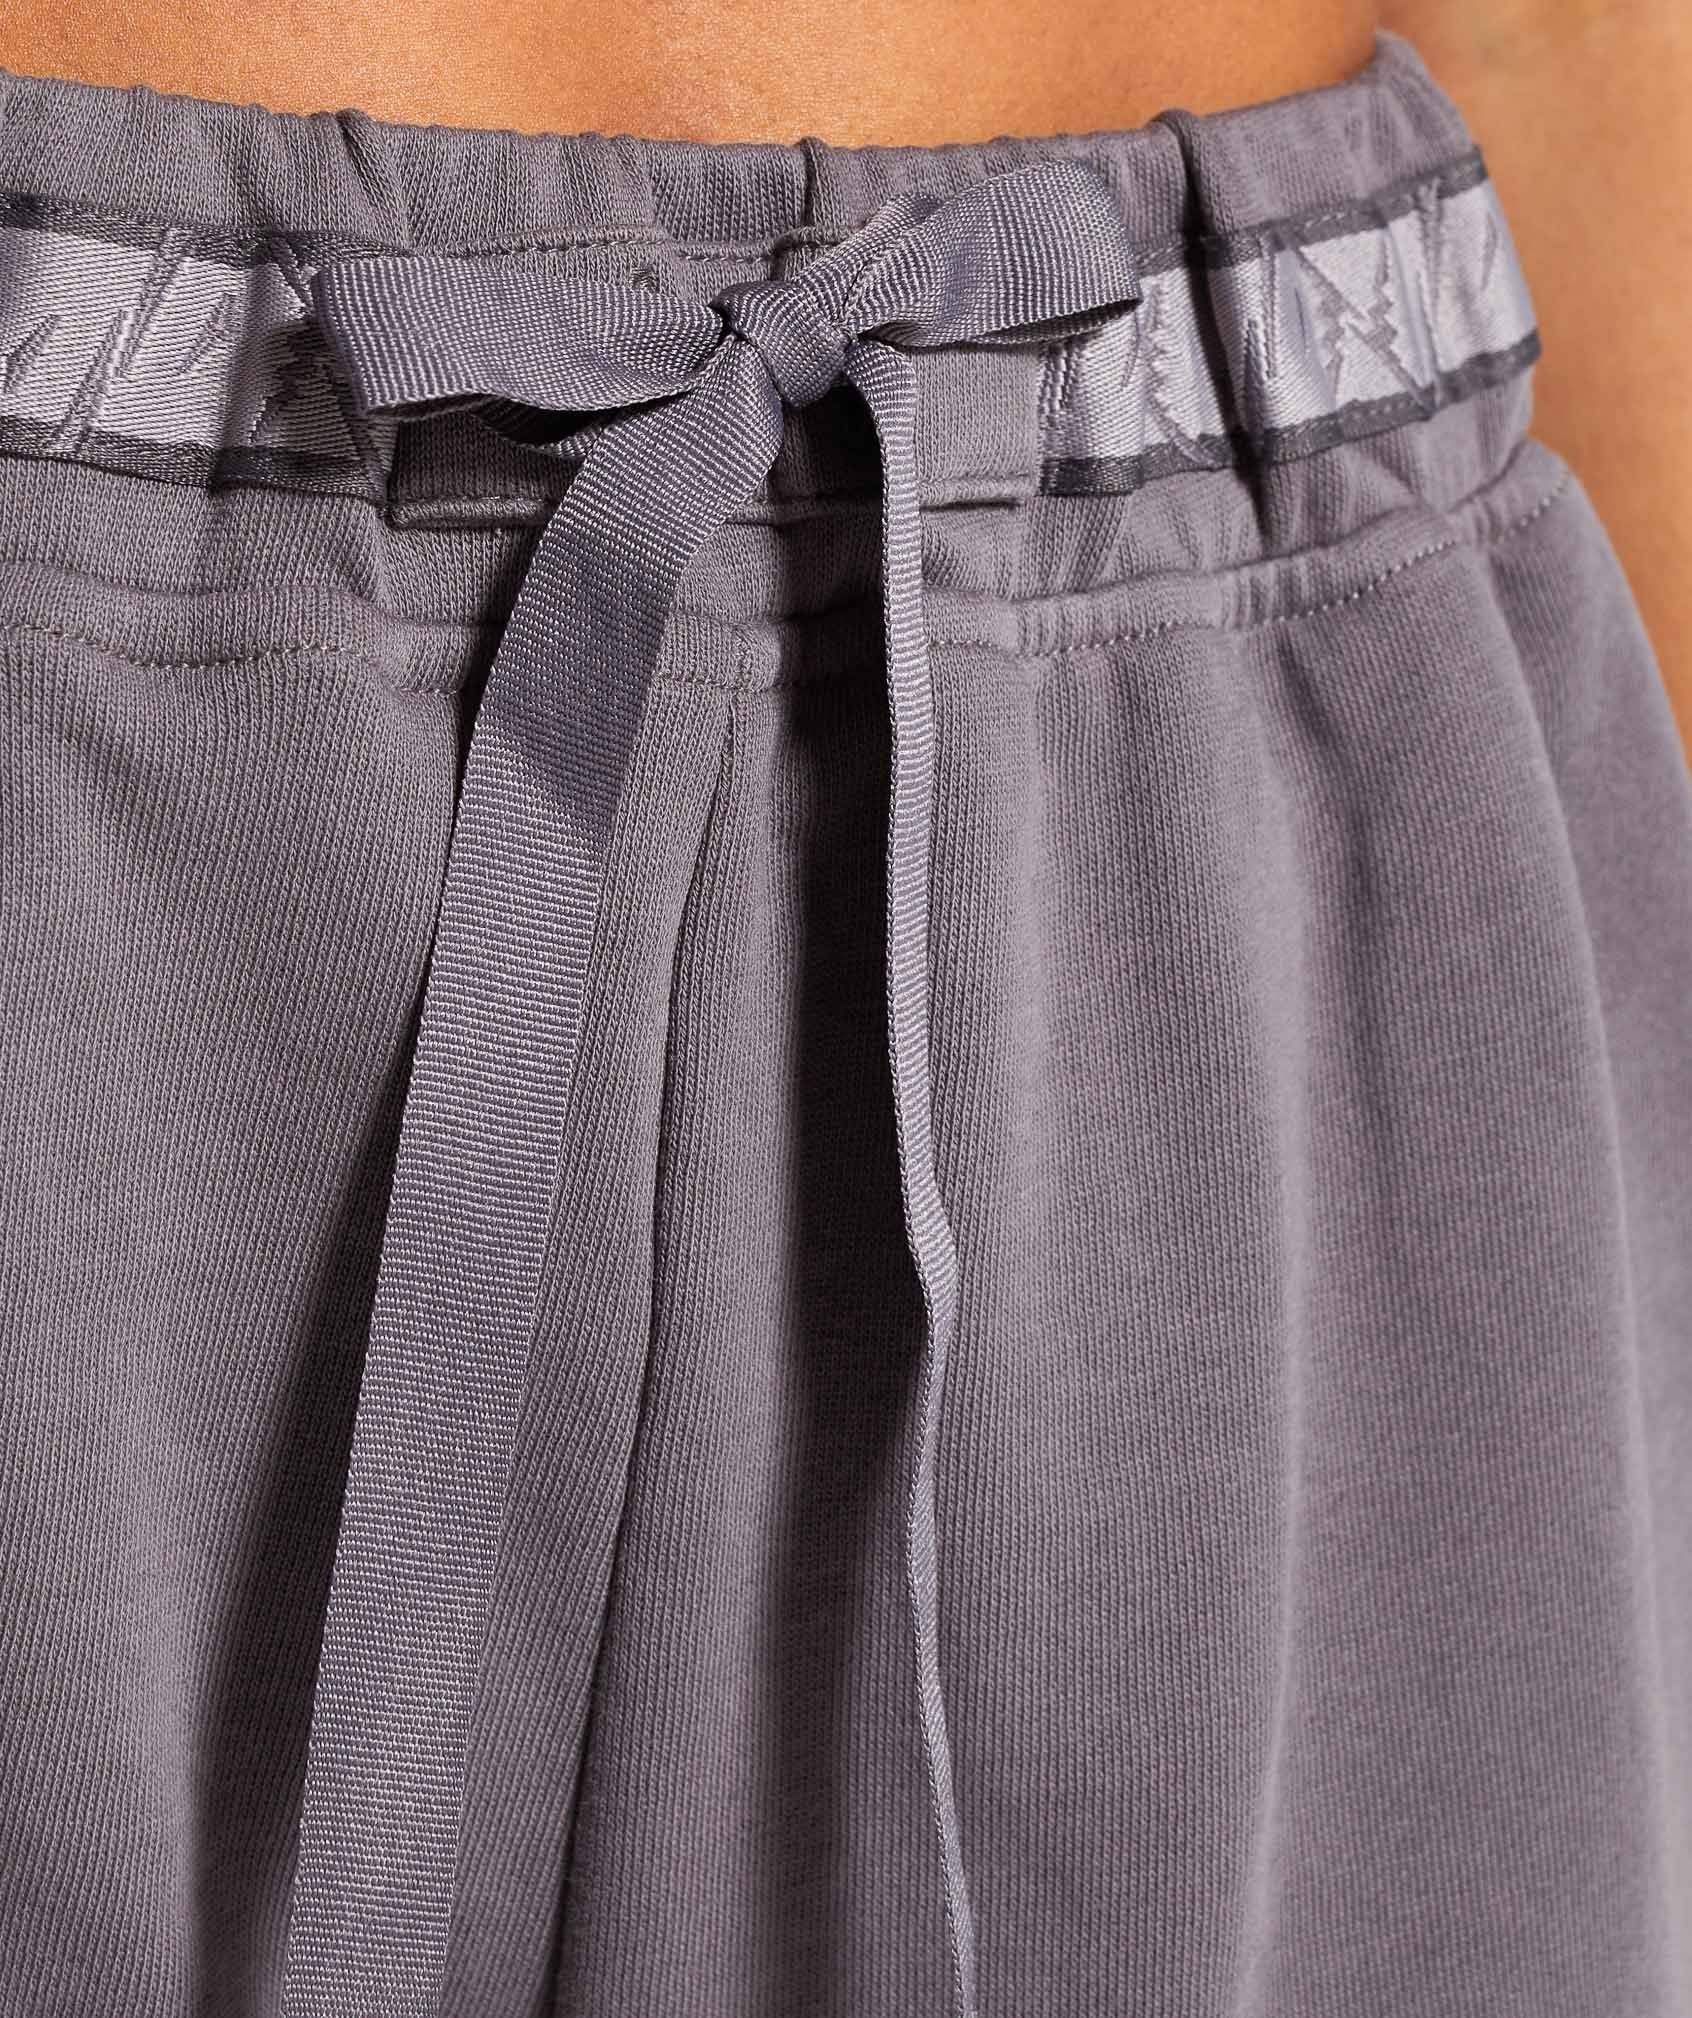 24/7 Shorts in Slate Lavender - view 6